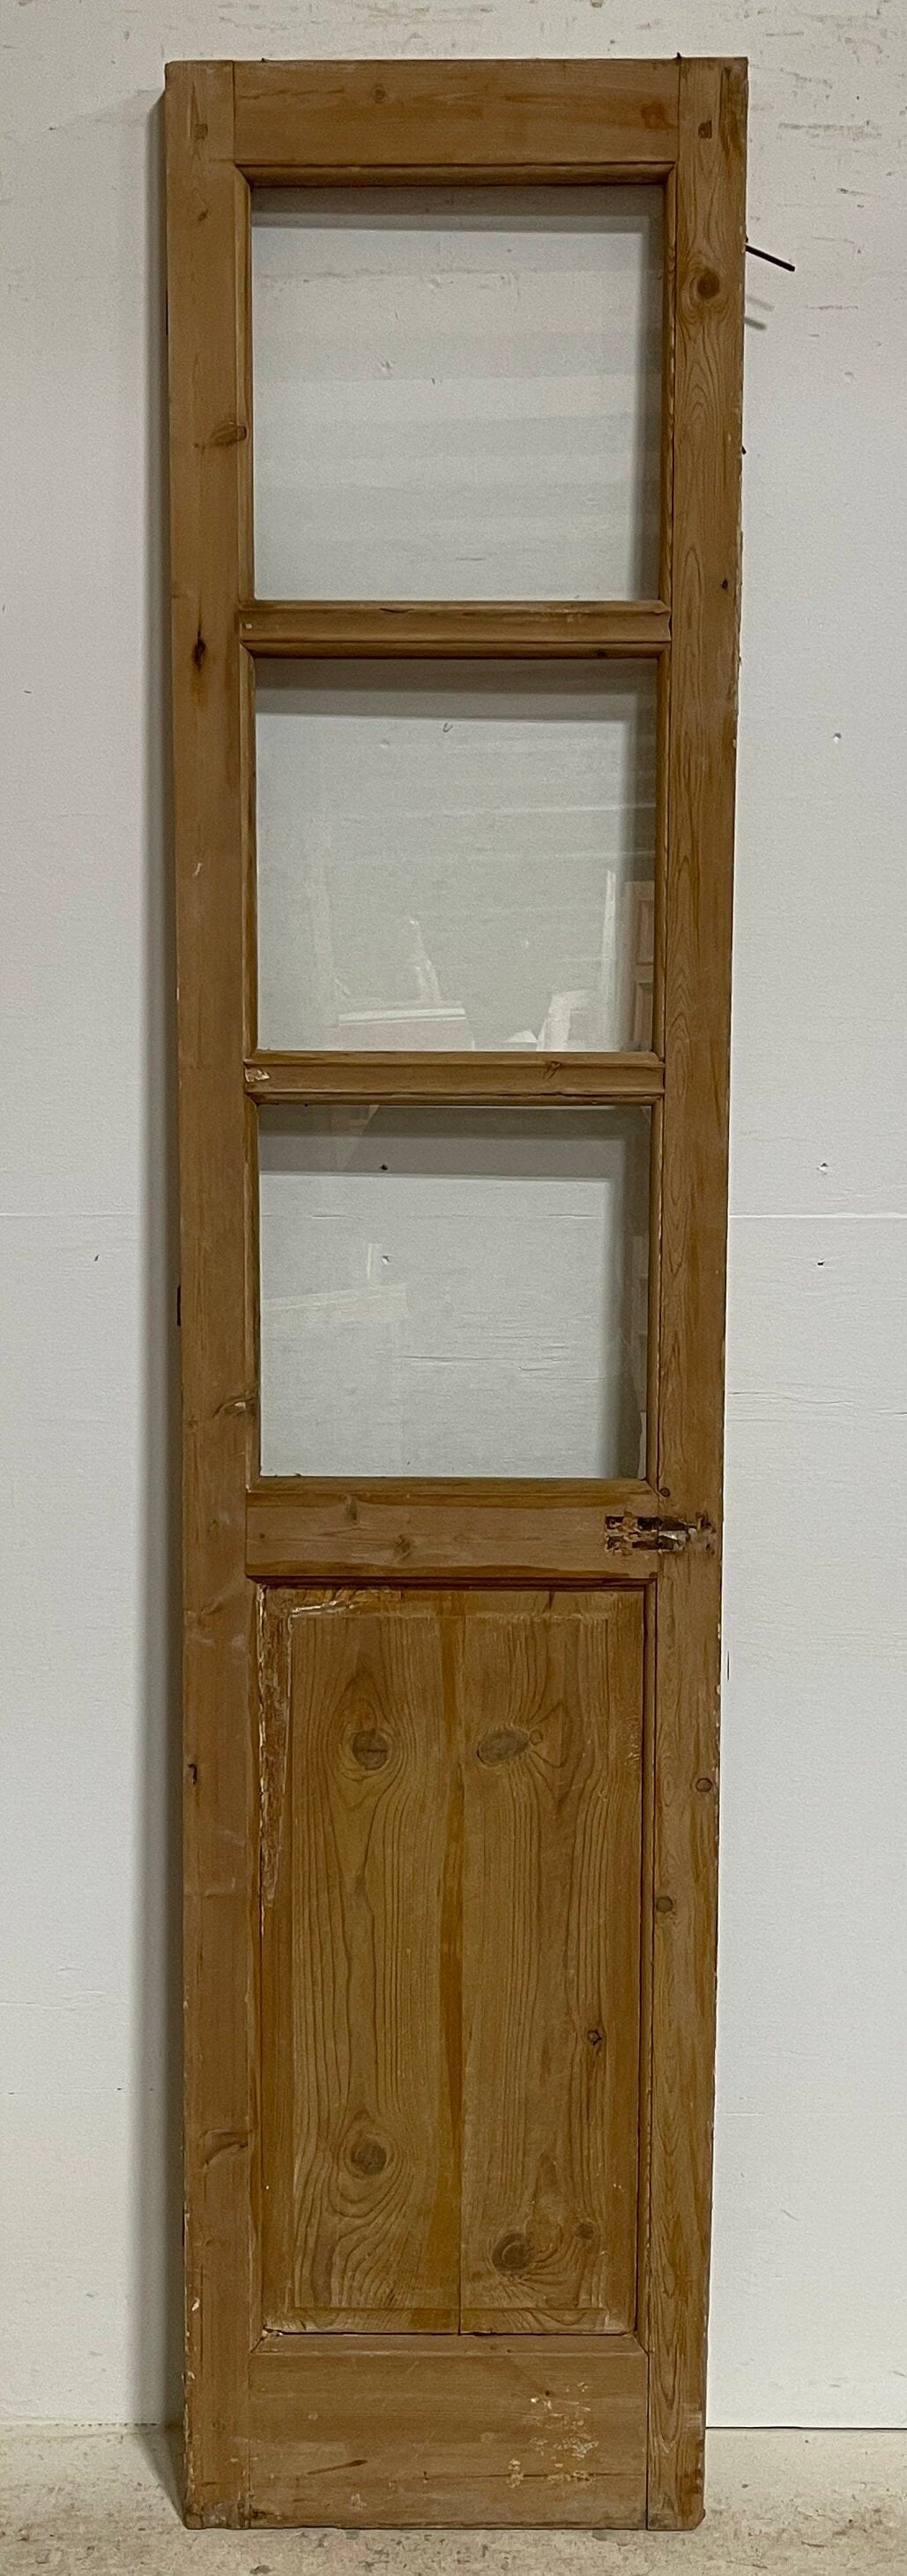 Antique French panel door with glass (86.5x19.25) G1506s